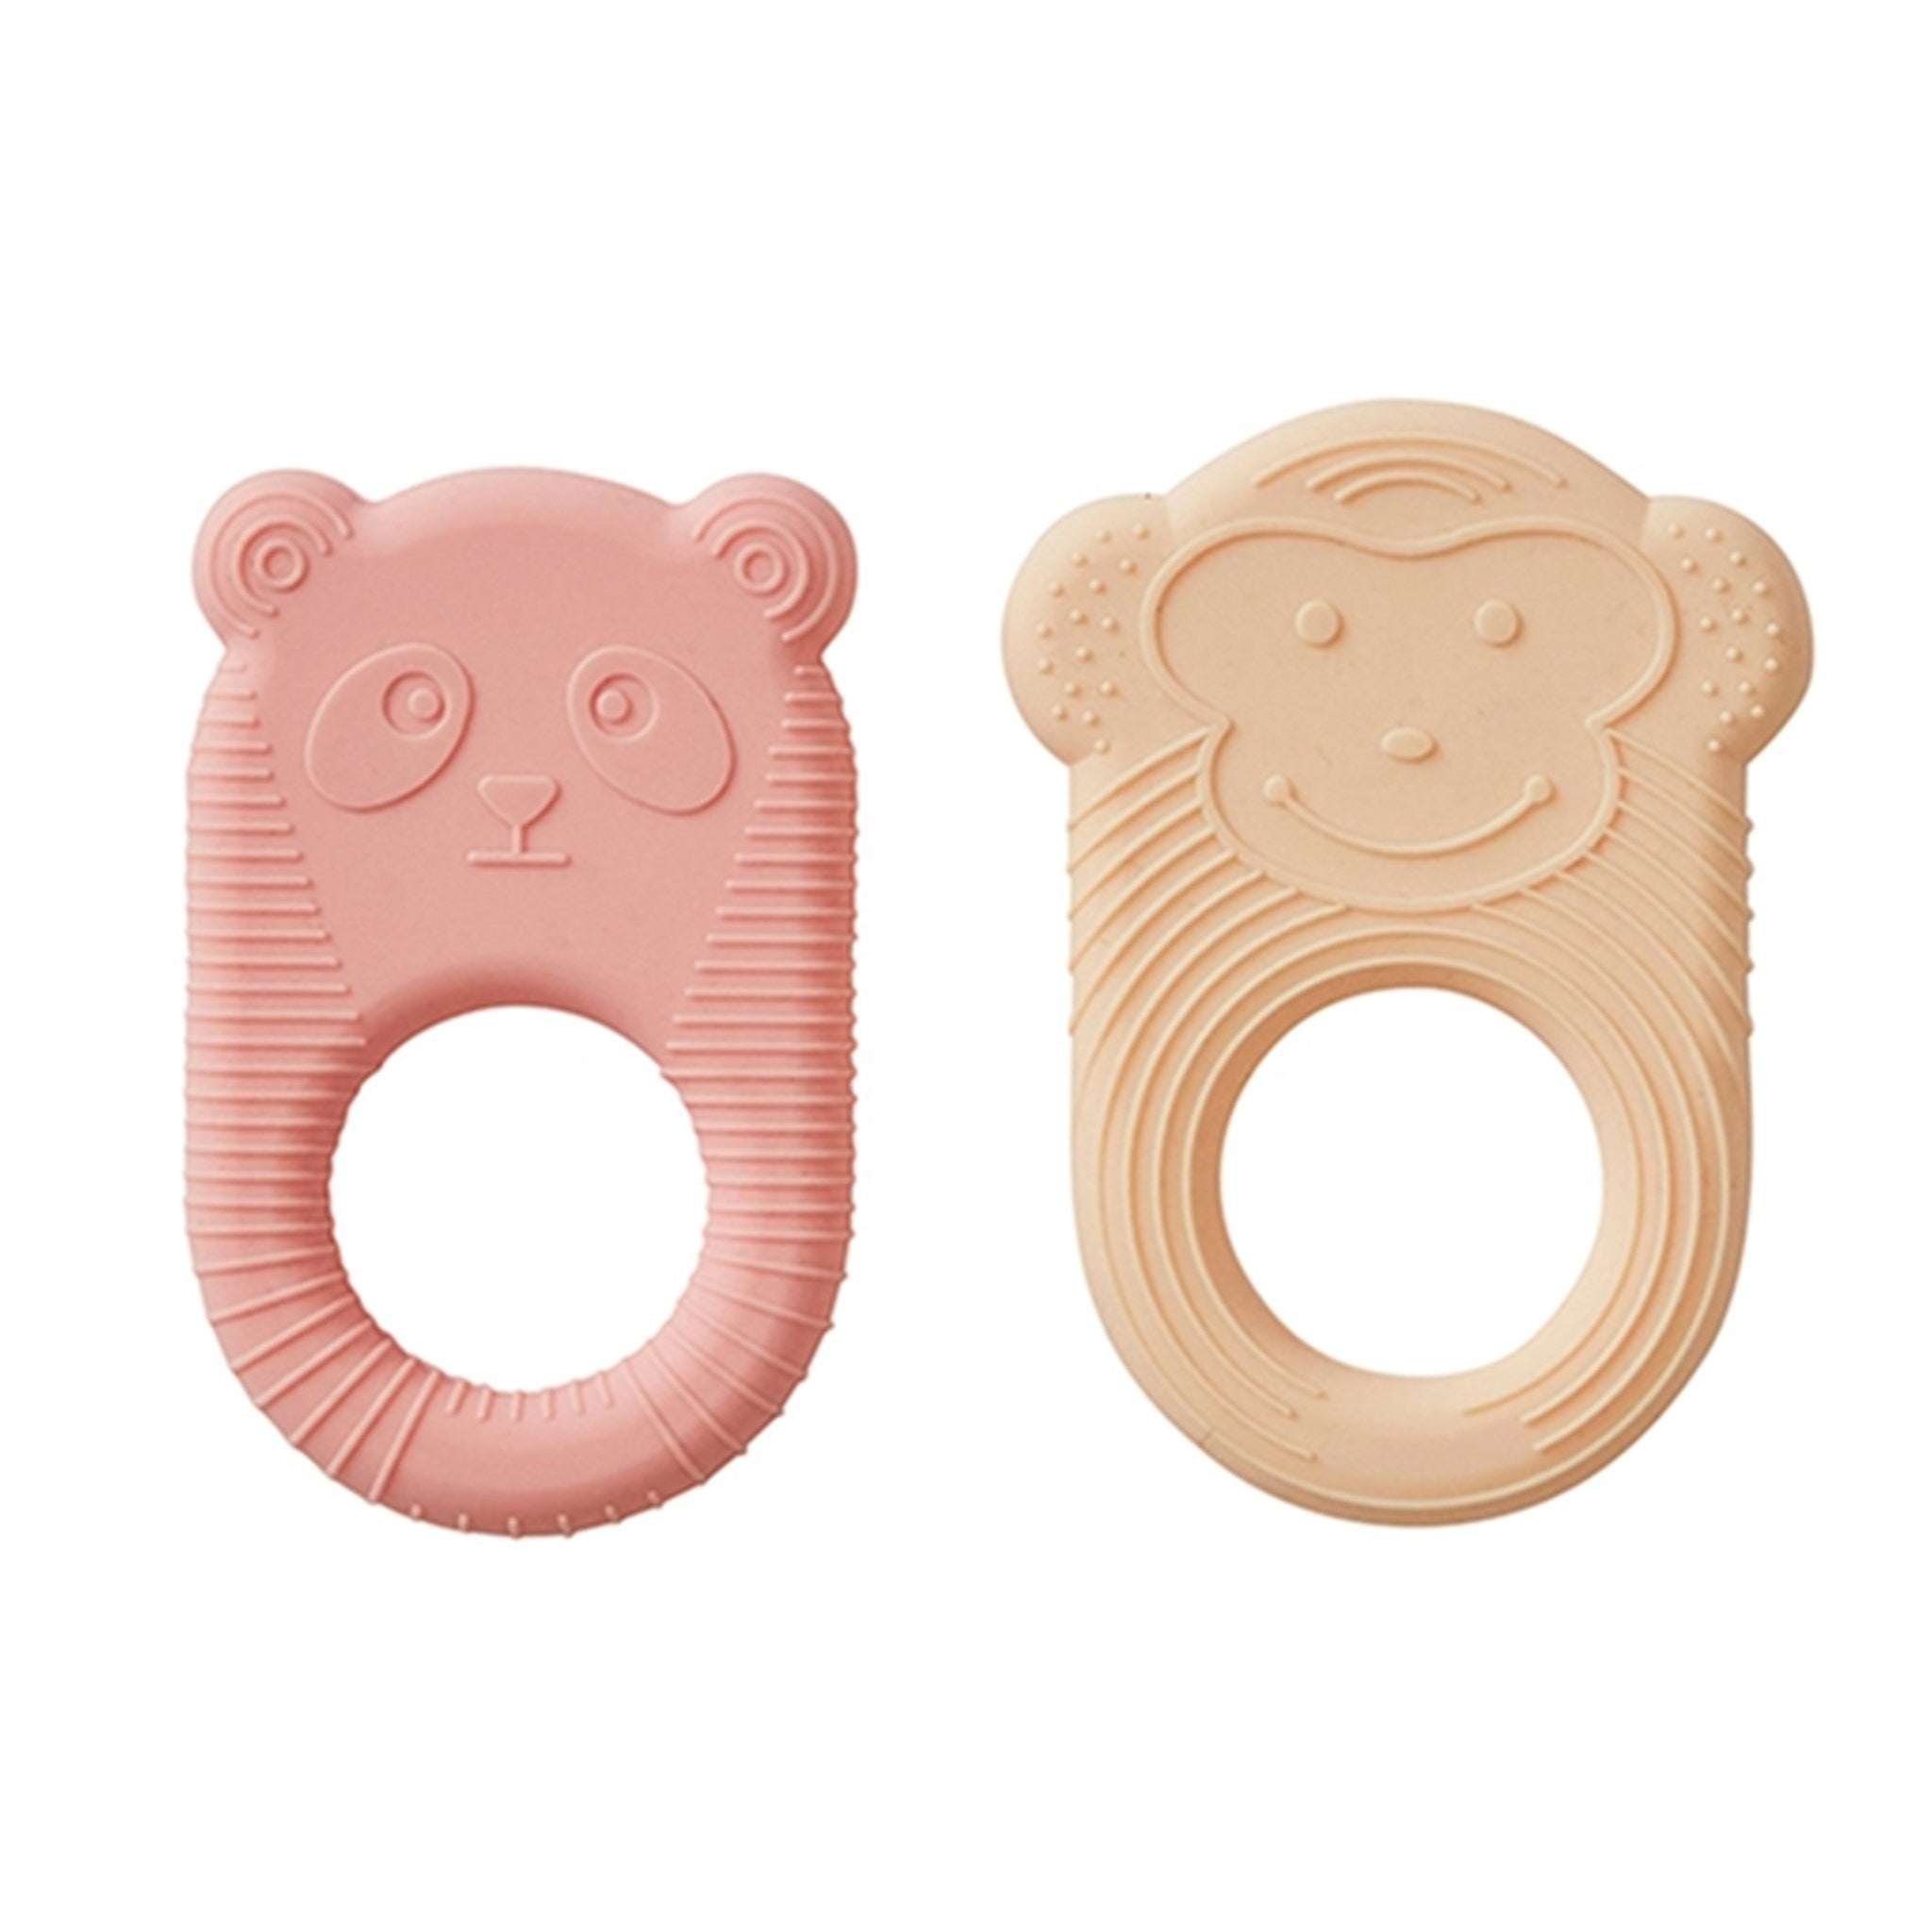 OYOY Nelson & Ling Ling Teether 2-Pack Vanilla/Koral